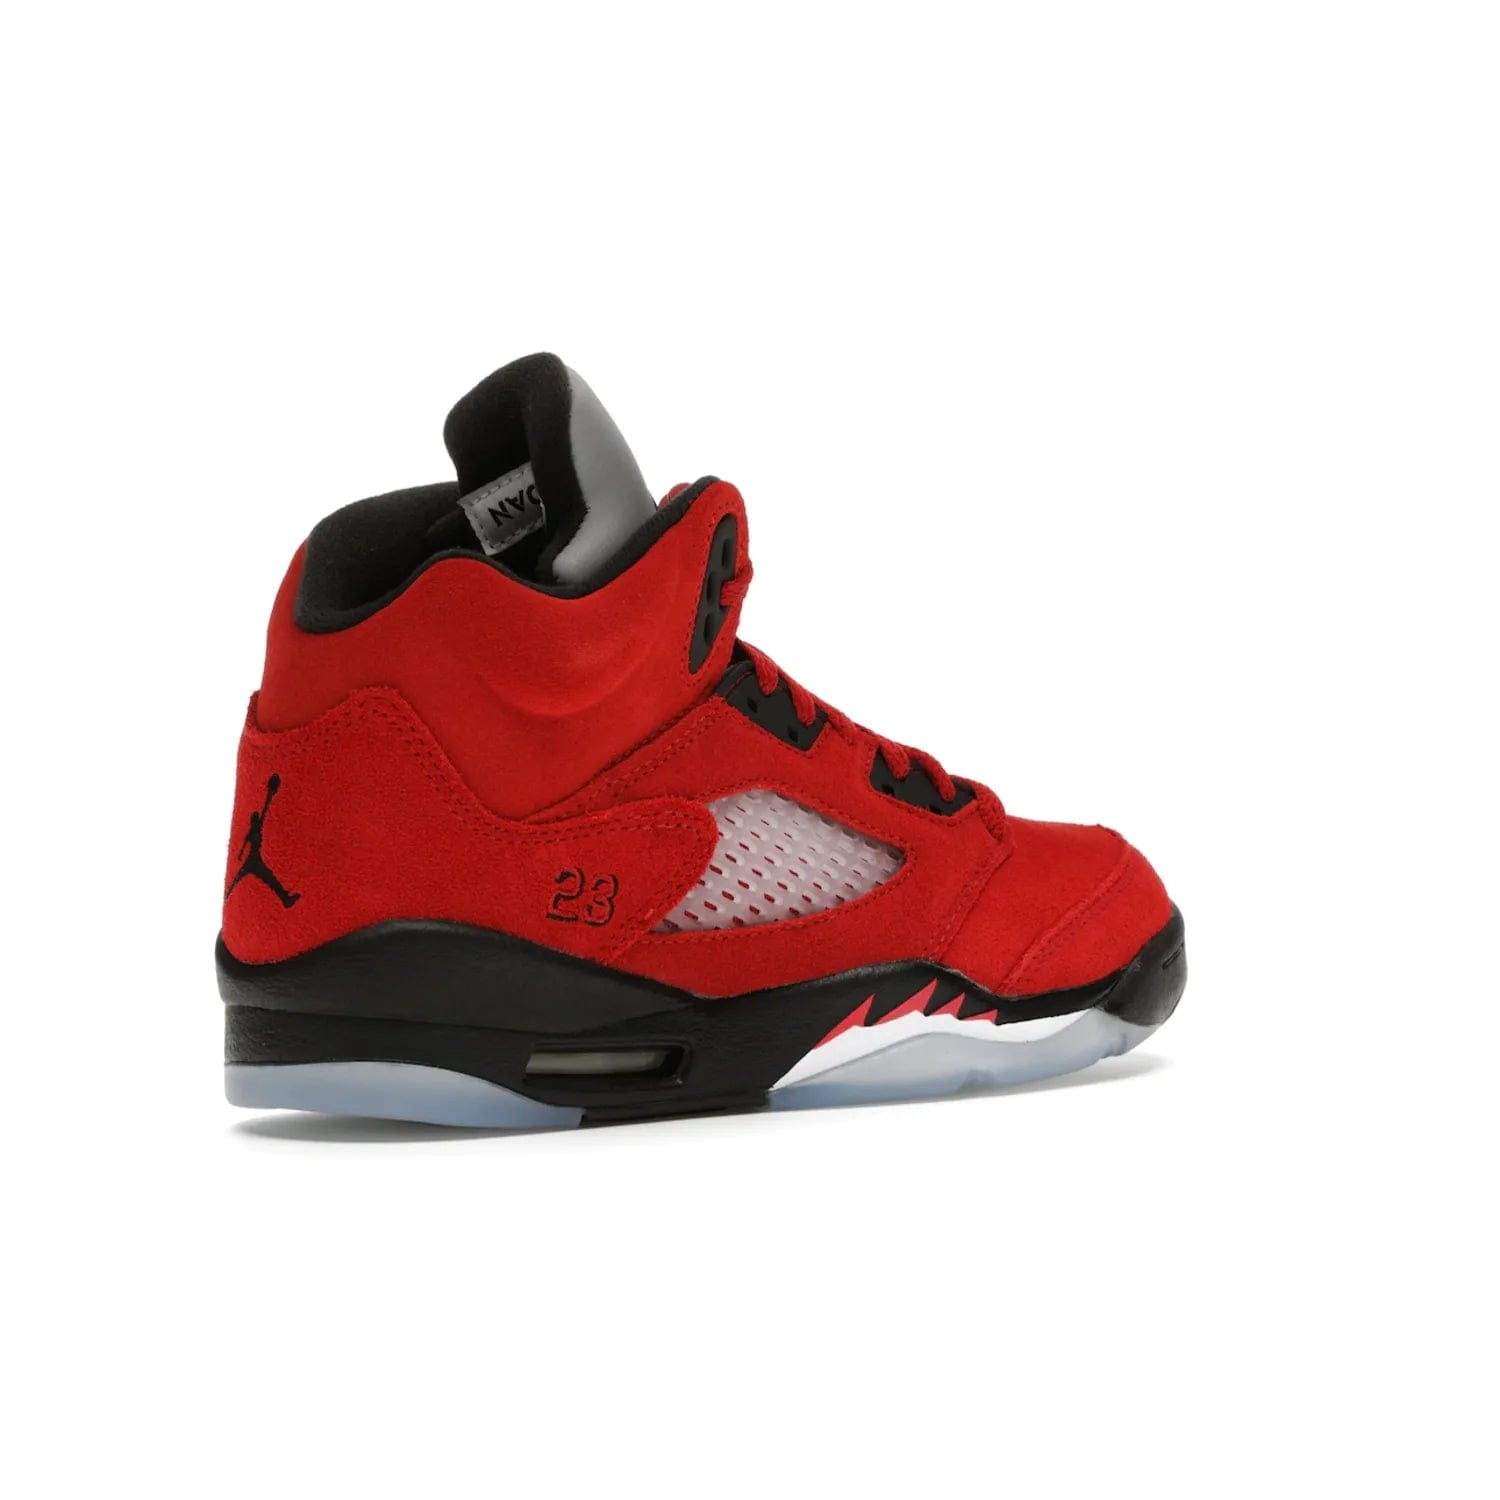 Jordan 5 Retro Raging Bull Red (2021) (GS) - Image 33 - Only at www.BallersClubKickz.com - Jordan 5 Retro Raging Bulls Red 2021 GS. Varsity Red suede upper with embroidered number 23, black leather detail, red laces, and midsole with air cushioning. Jumpman logos on tongue, heel, and outsole. On-trend streetwear and basketball style. Released April 10, 2021.